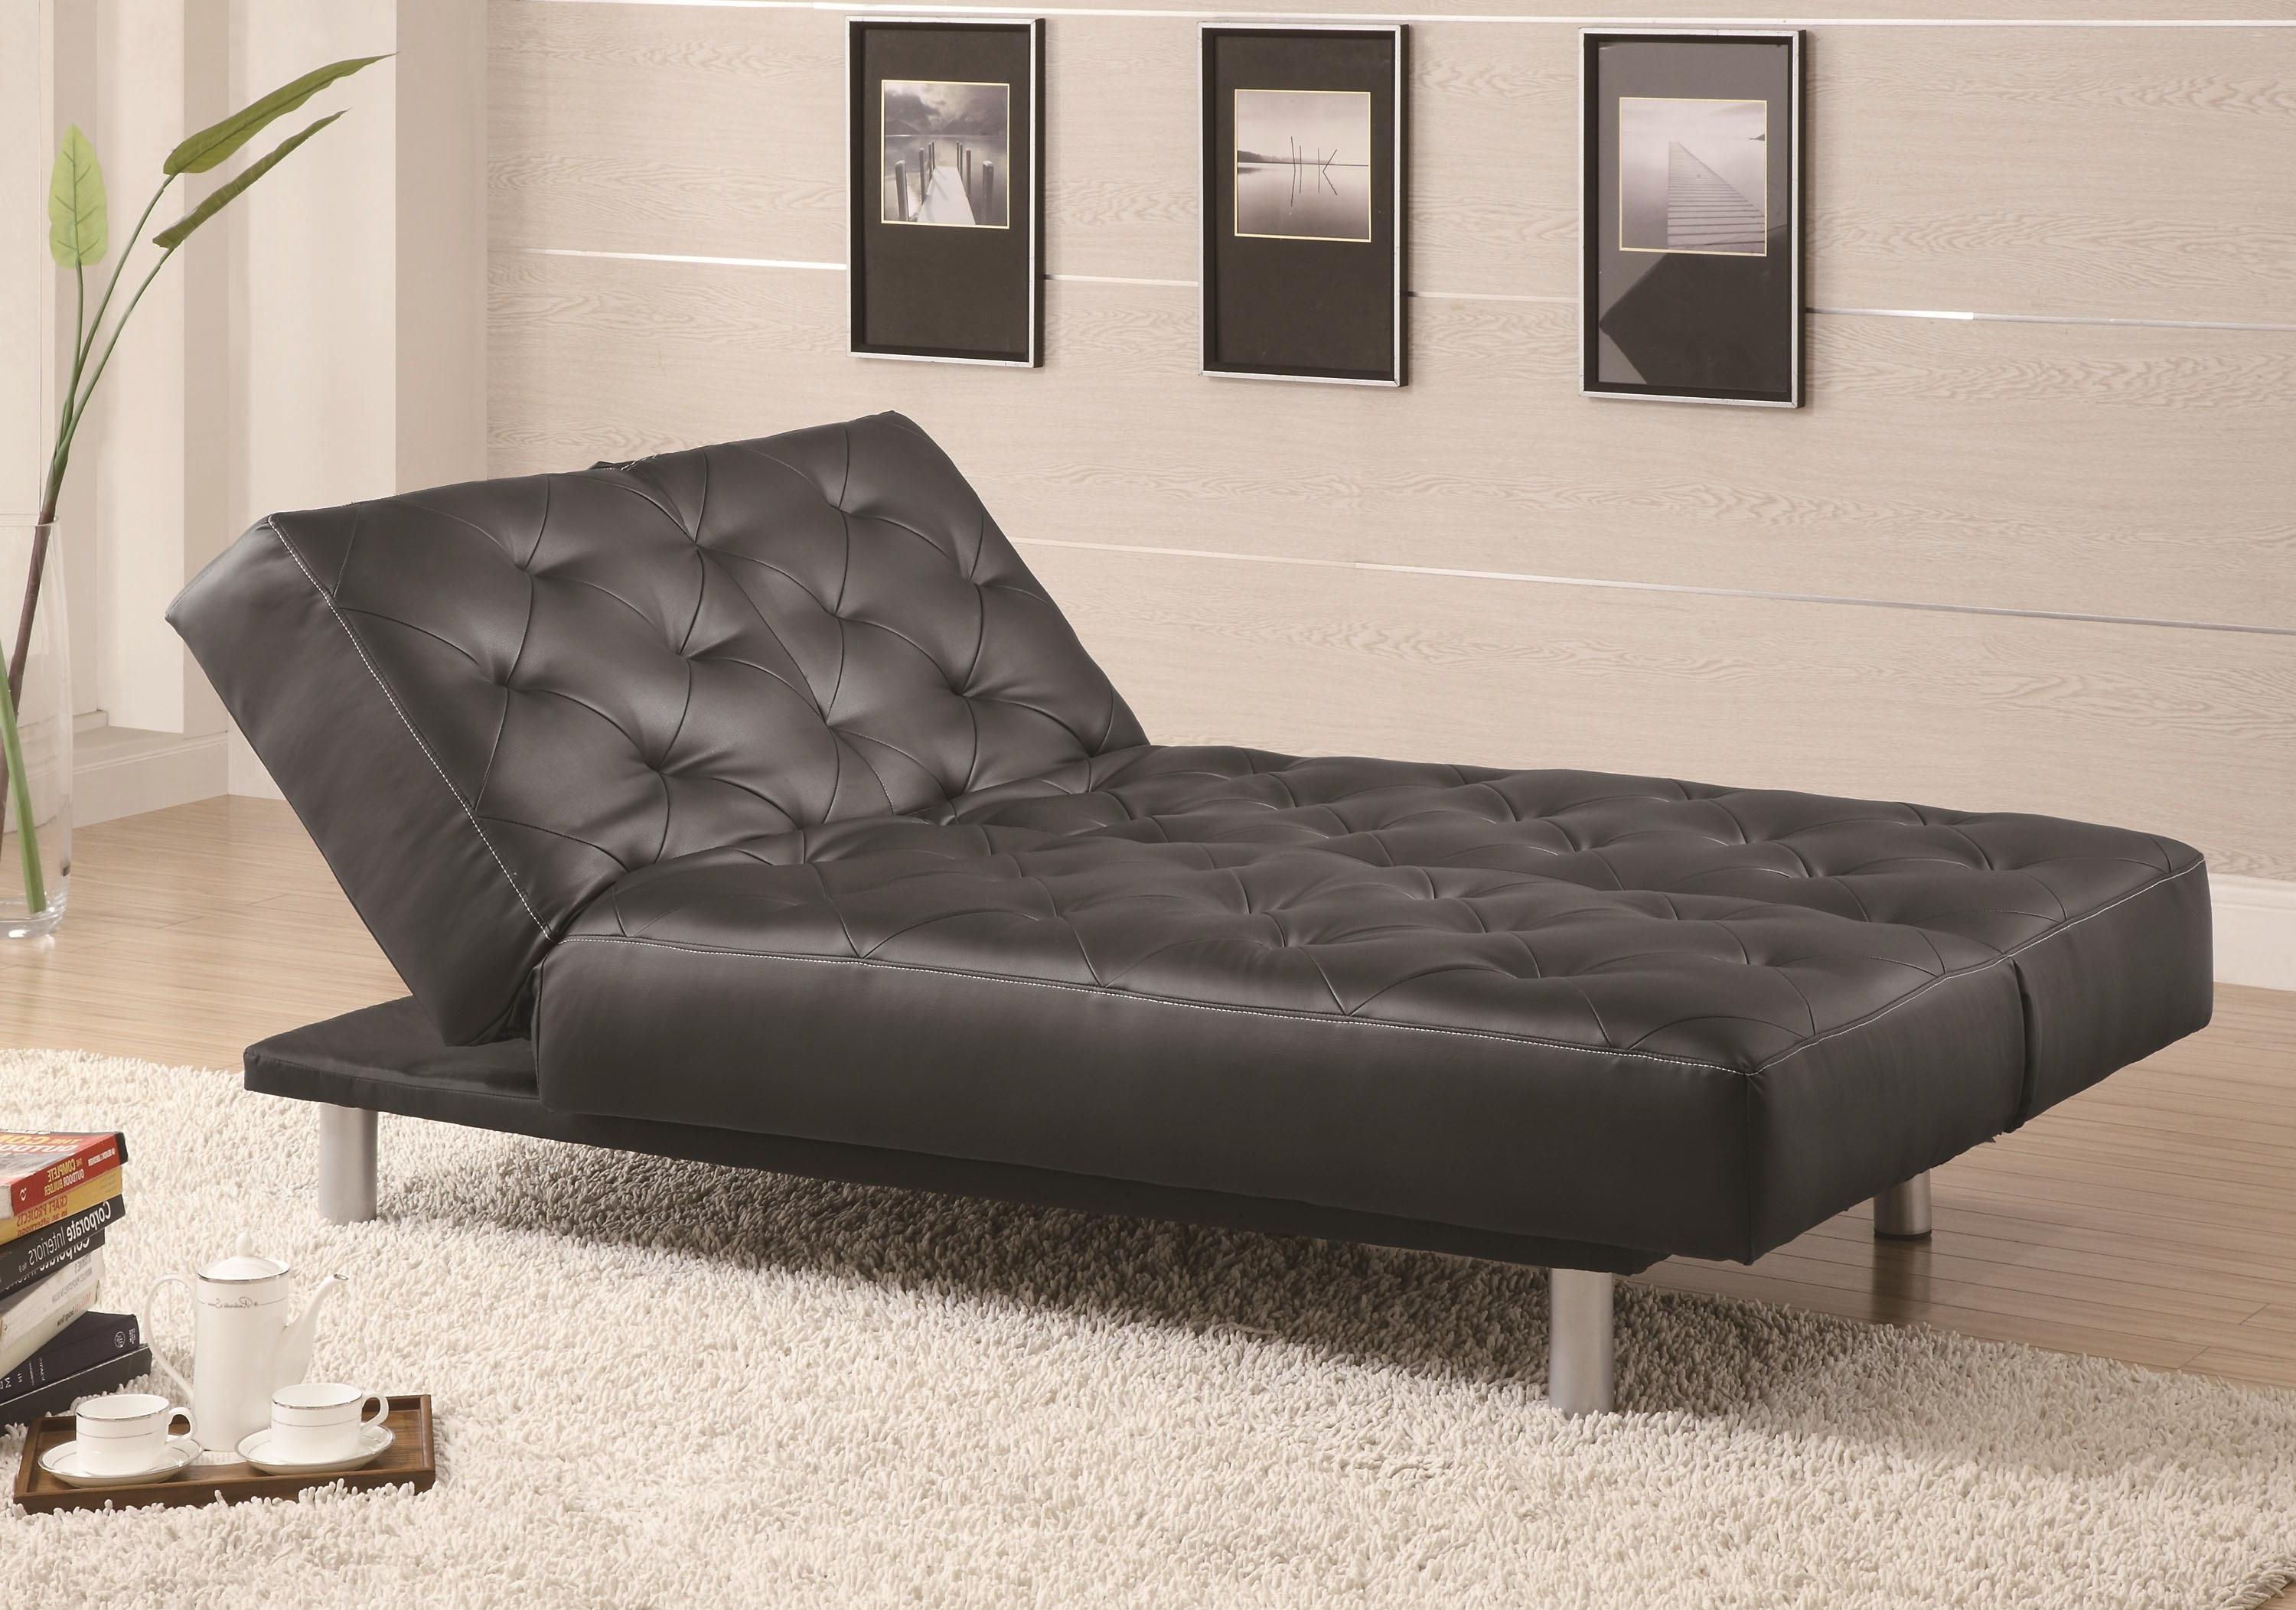 Chaise Beds With Most Up To Date Coaster Sofa Beds And Futons Black Vinyl Tufted Sofa Bed/oversize (View 11 of 15)